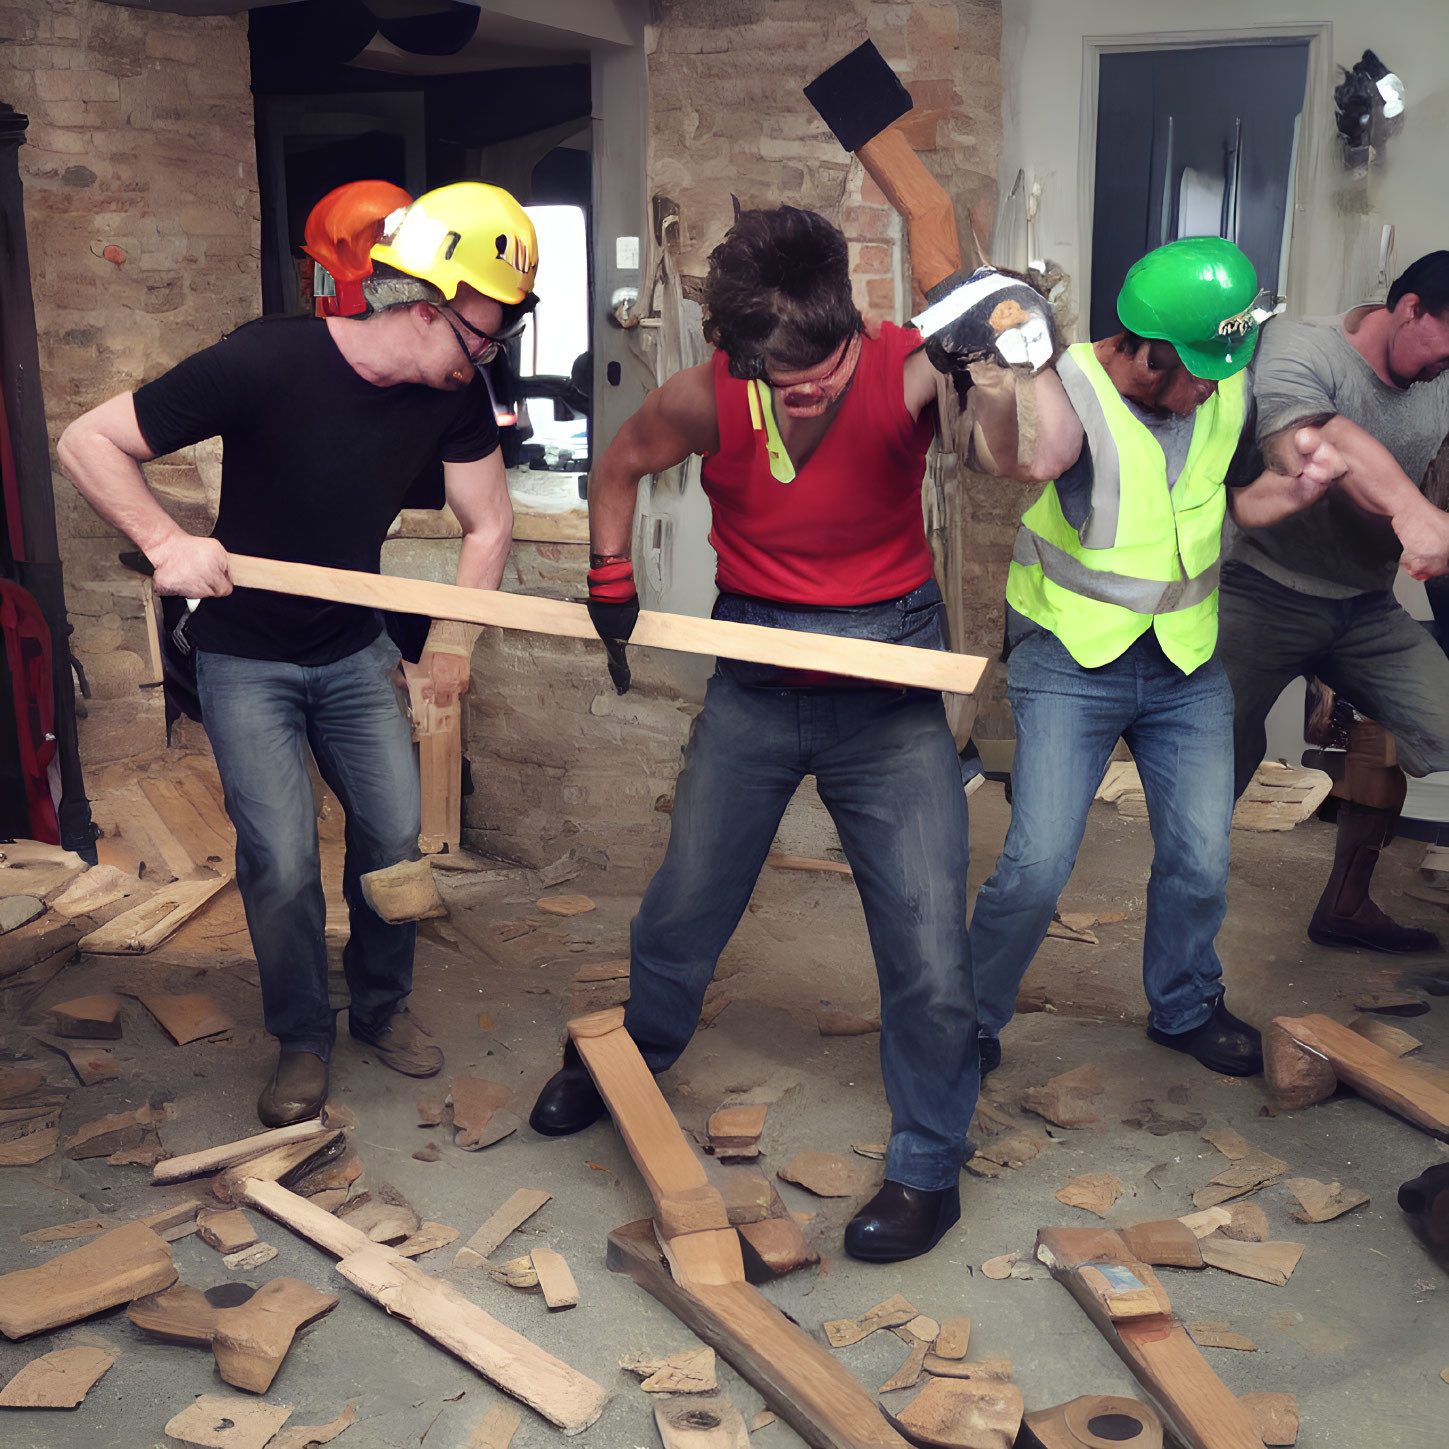 Construction workers demolishing wooden planks with sledgehammers in debris-filled room